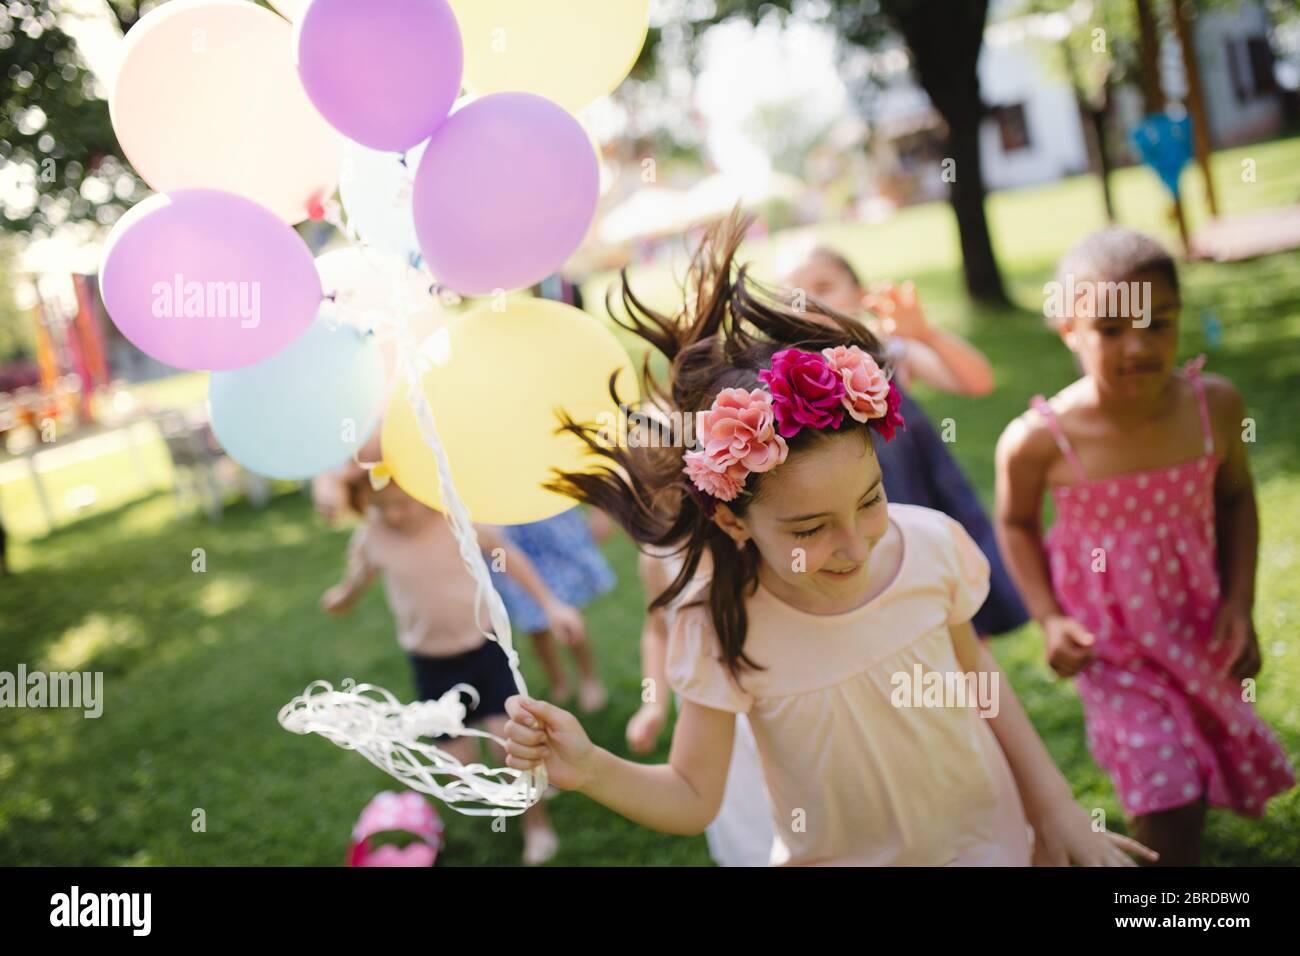 Small children running outdoors in garden in summer, playing. Stock Photo